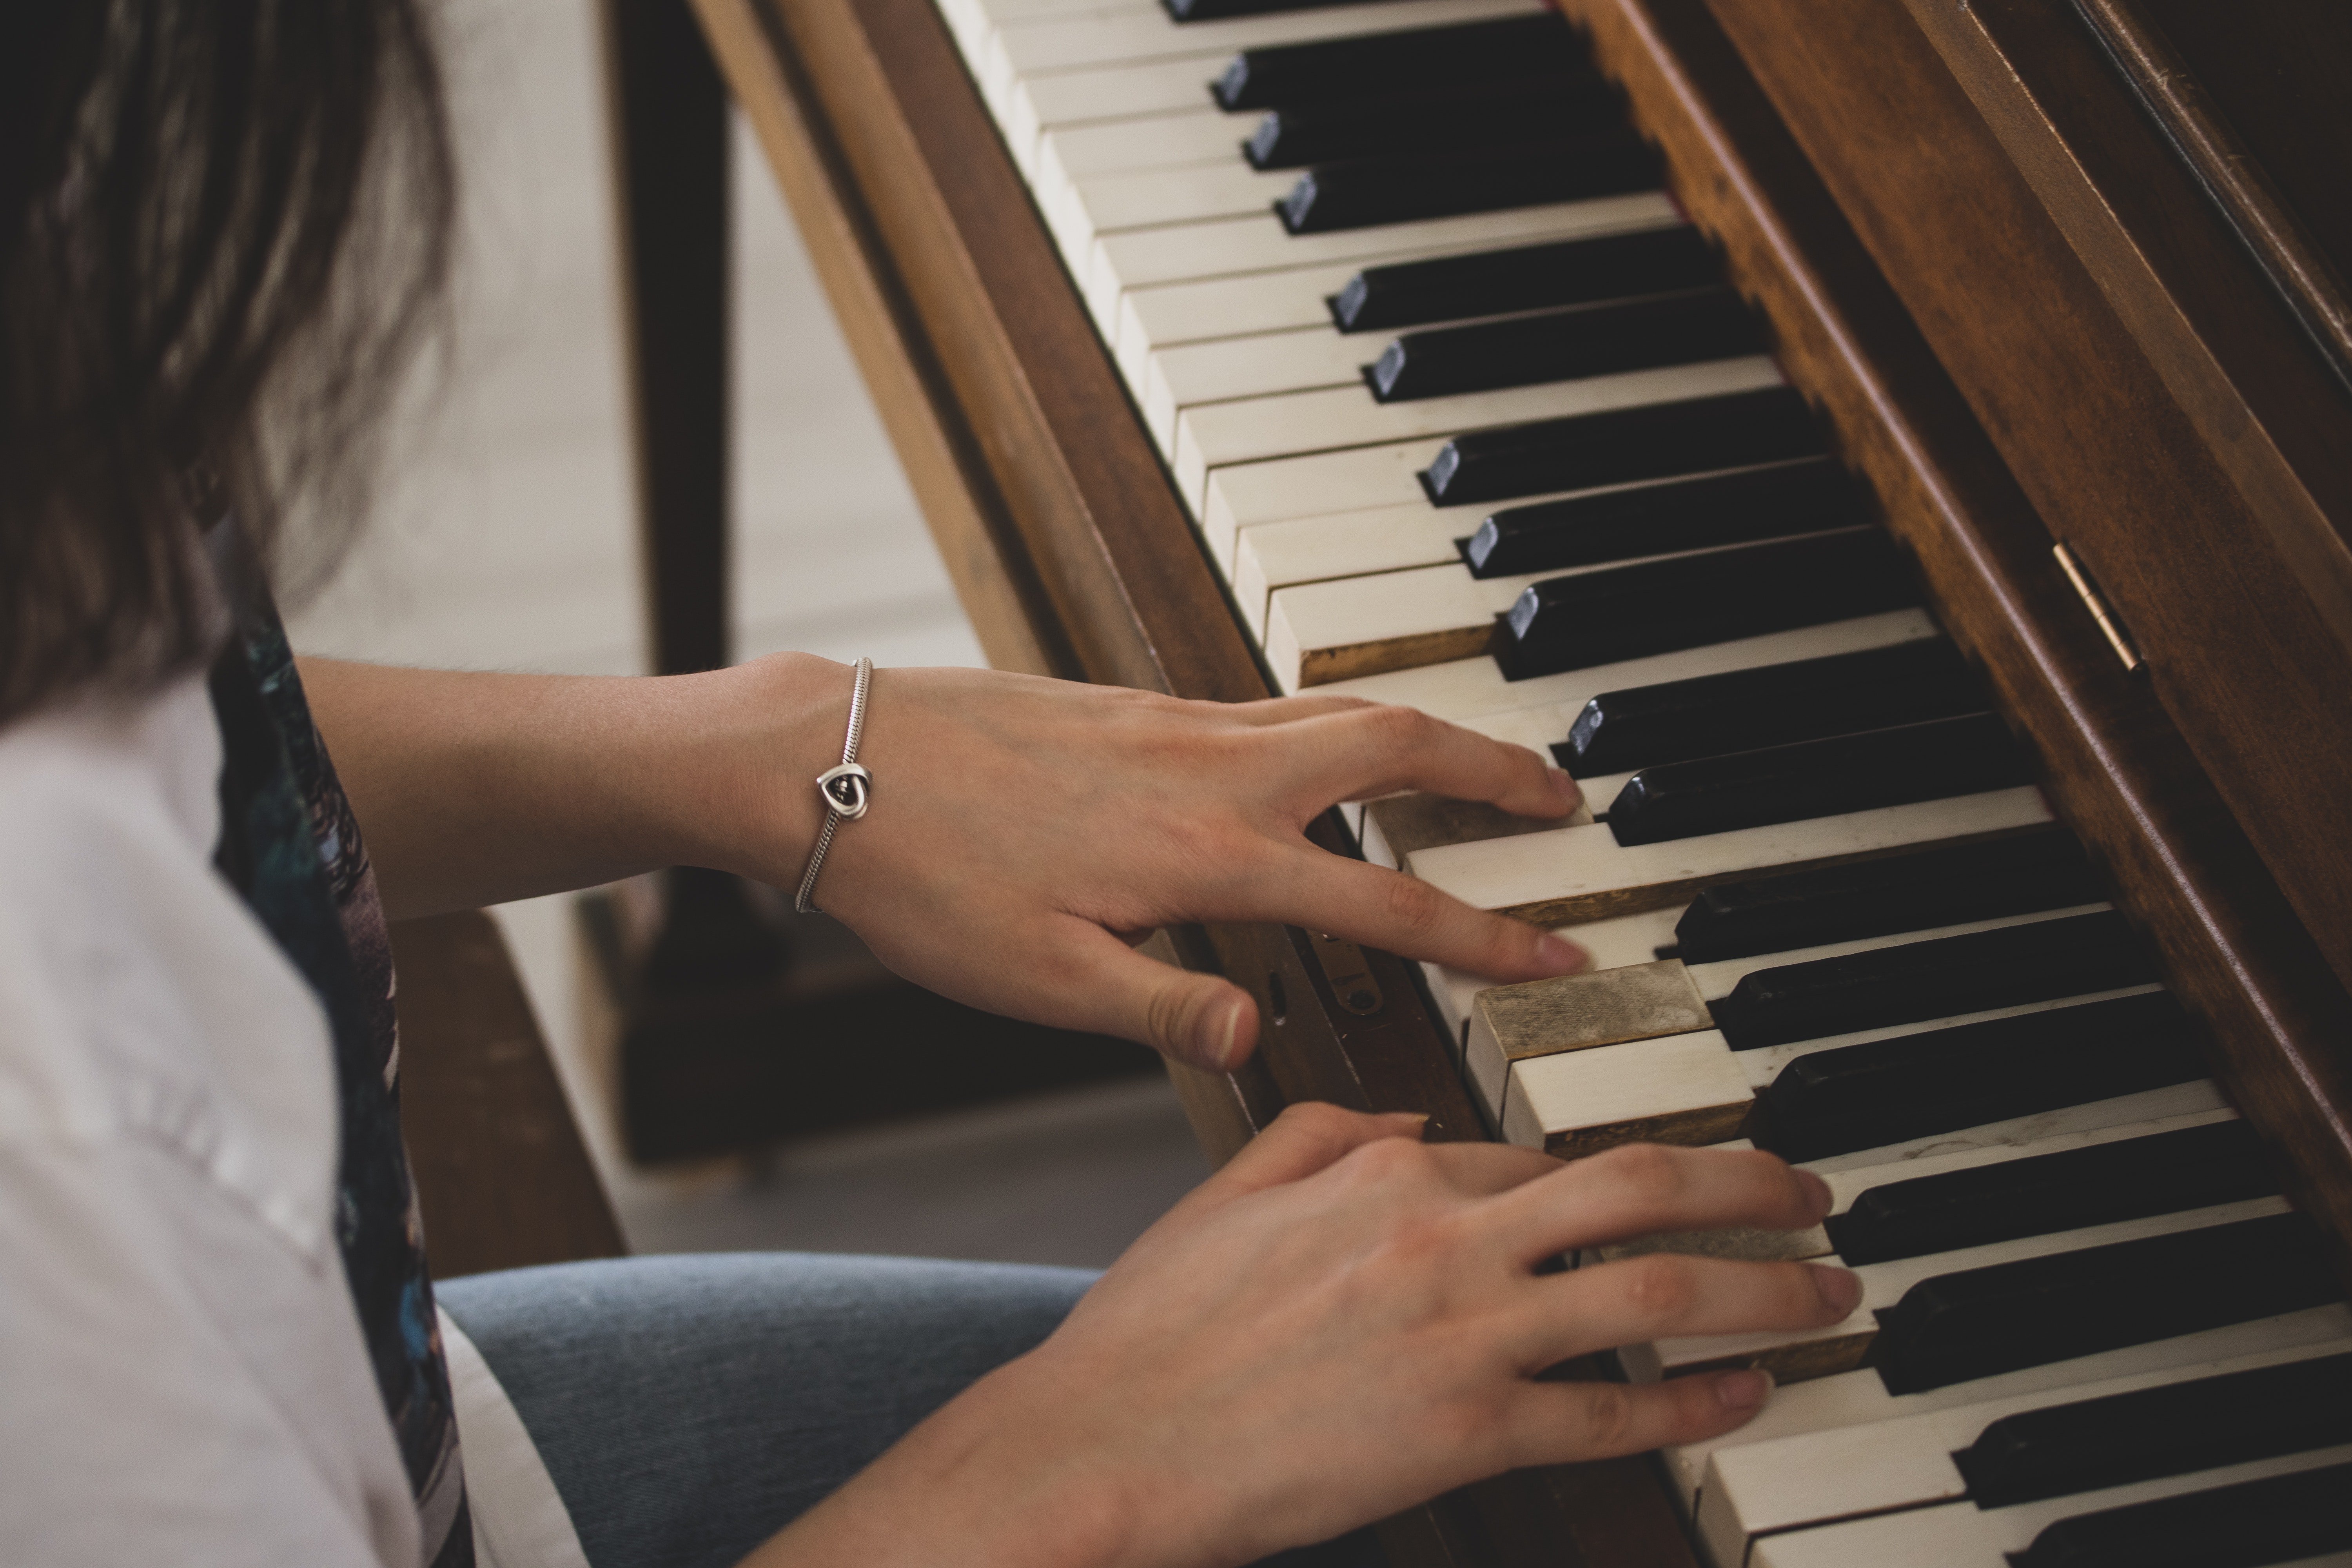 Mr. Lassiter told Sarah she wasn't cut out to be a pianist. | Source: Pexels